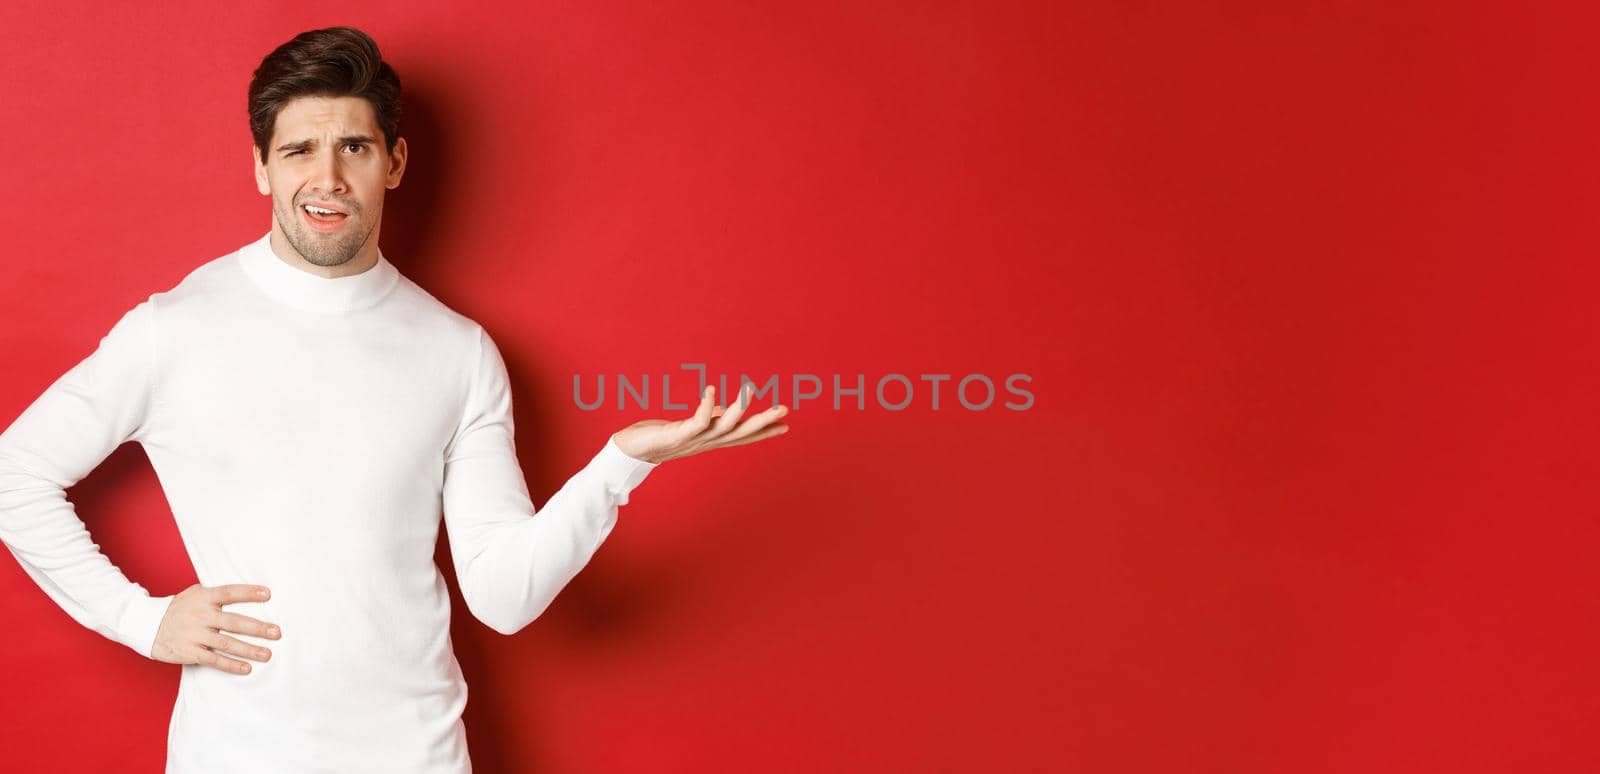 Portrait of confused and displeased man, complaining about something, looking with dismay, standing over red background.